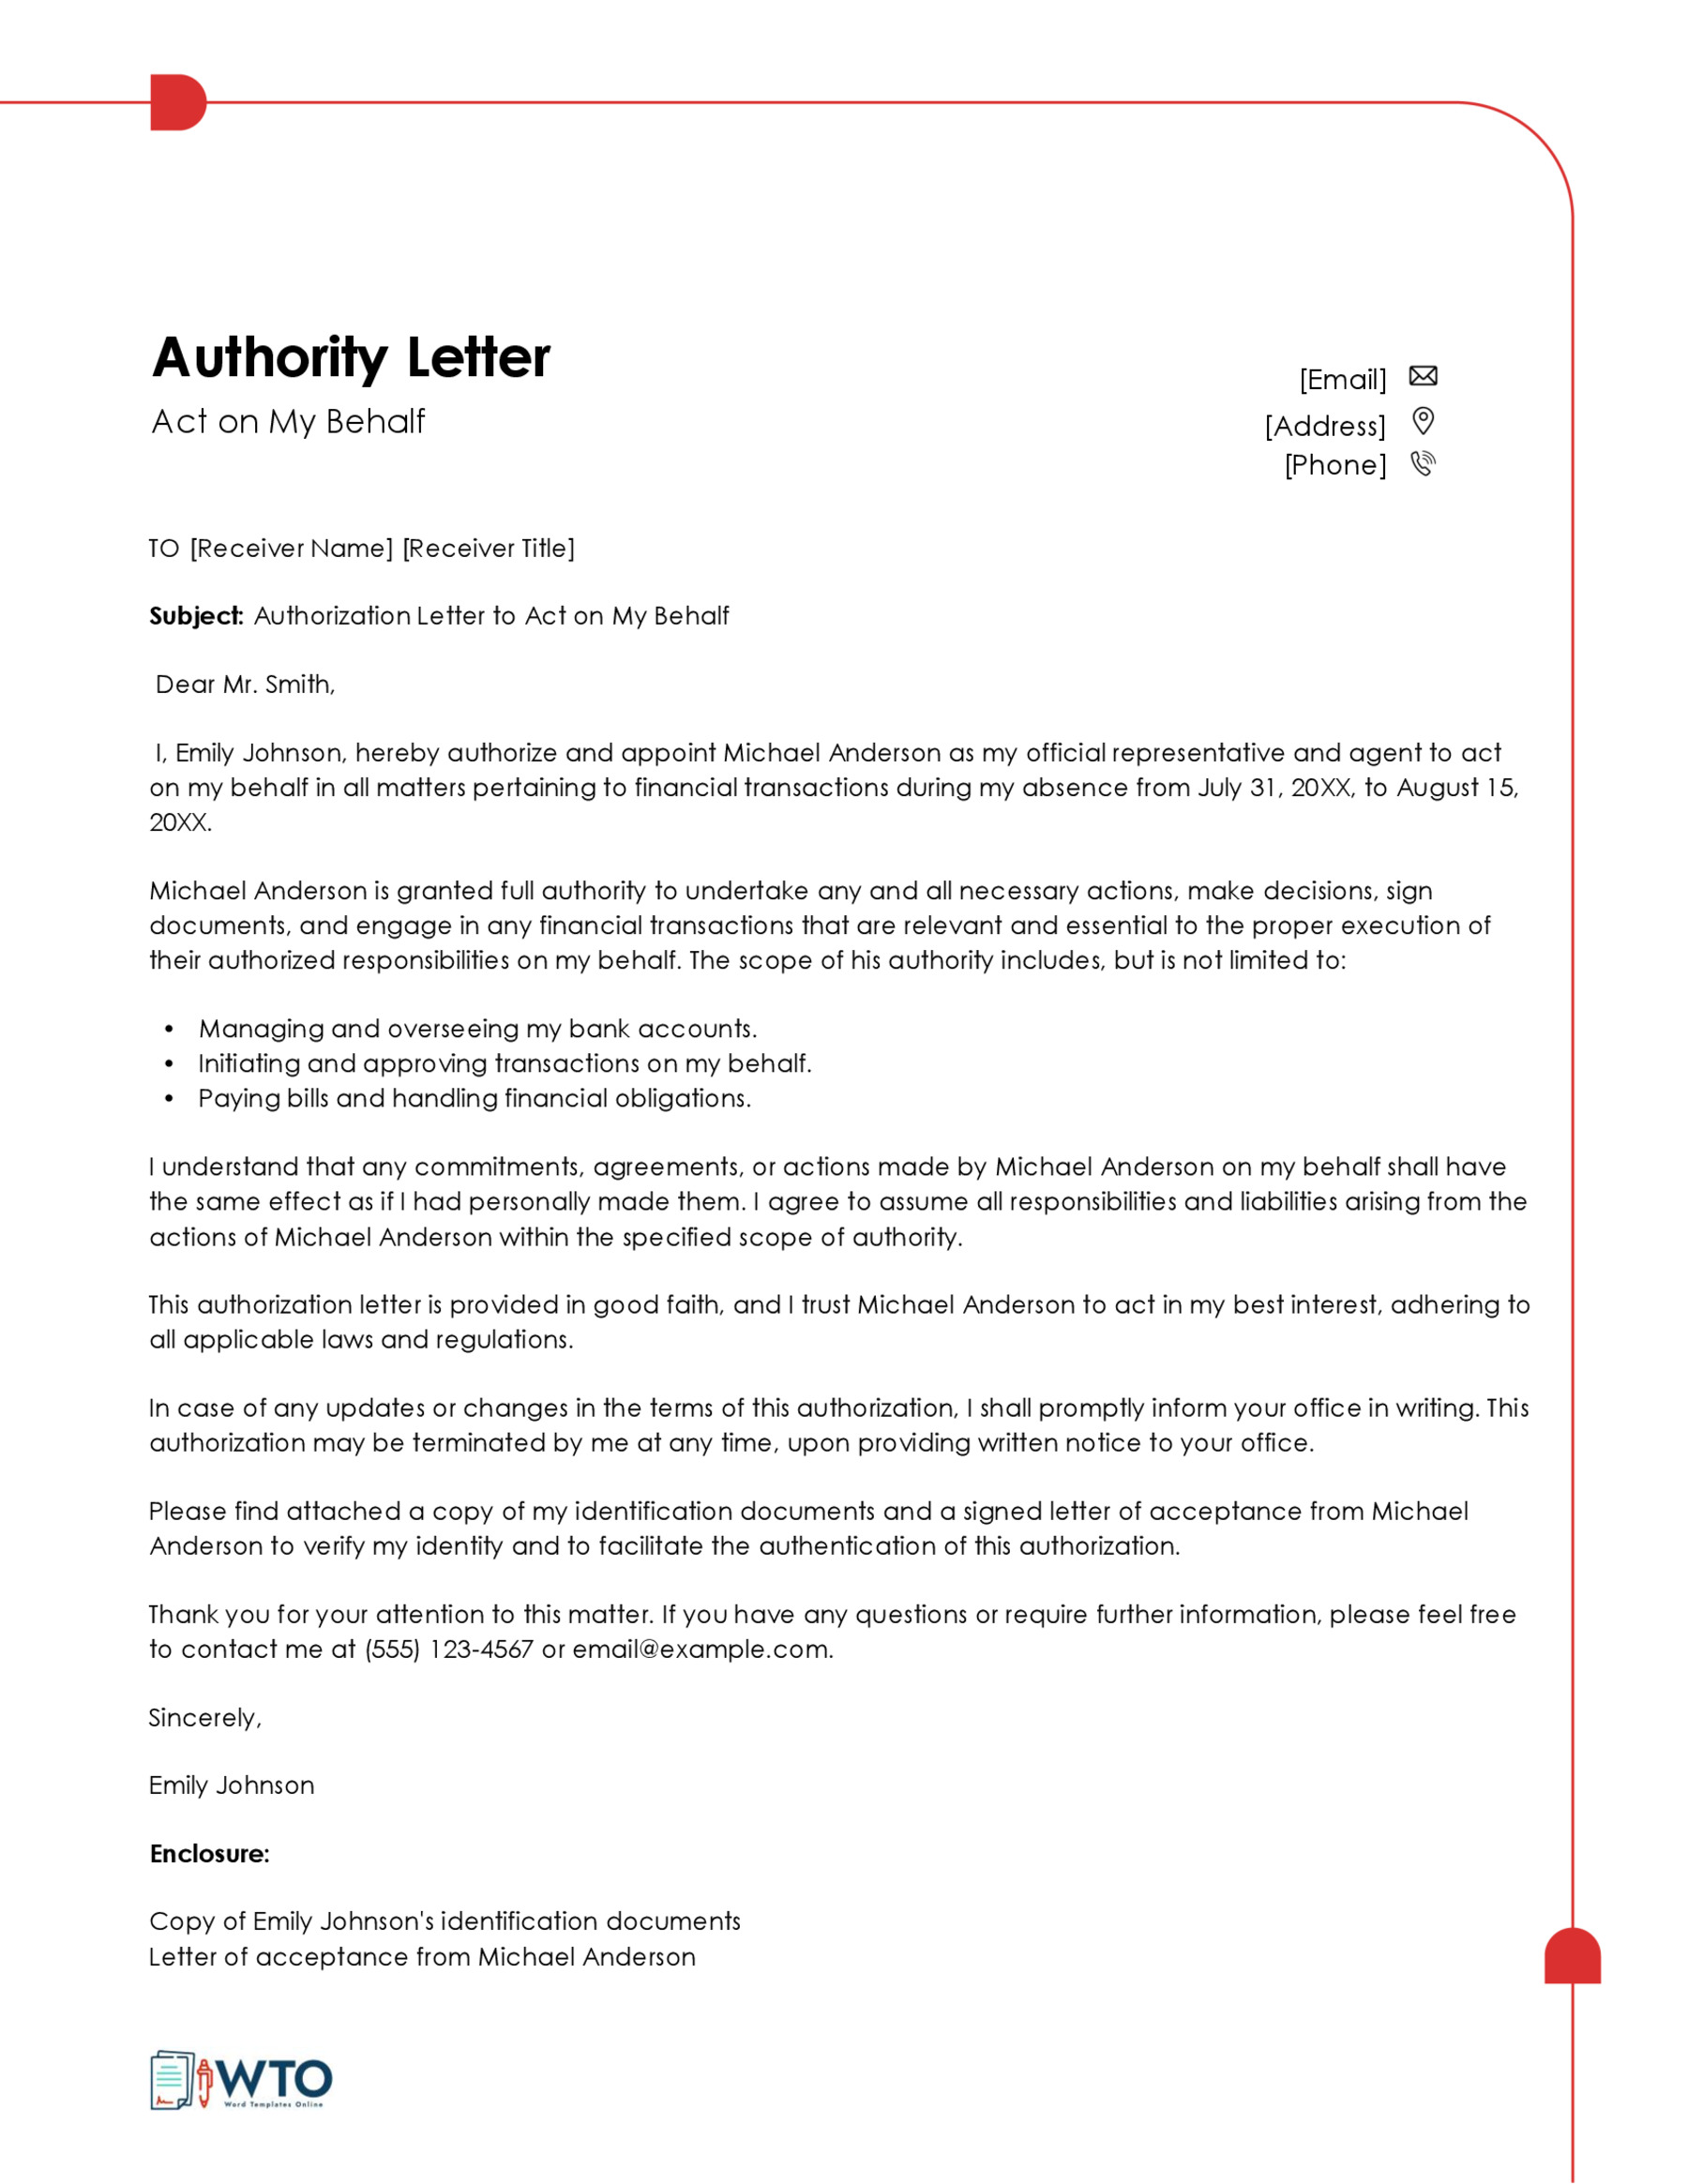 Free Downloadable Act on Behalf Authorization Letter Sample 01 for Word Document